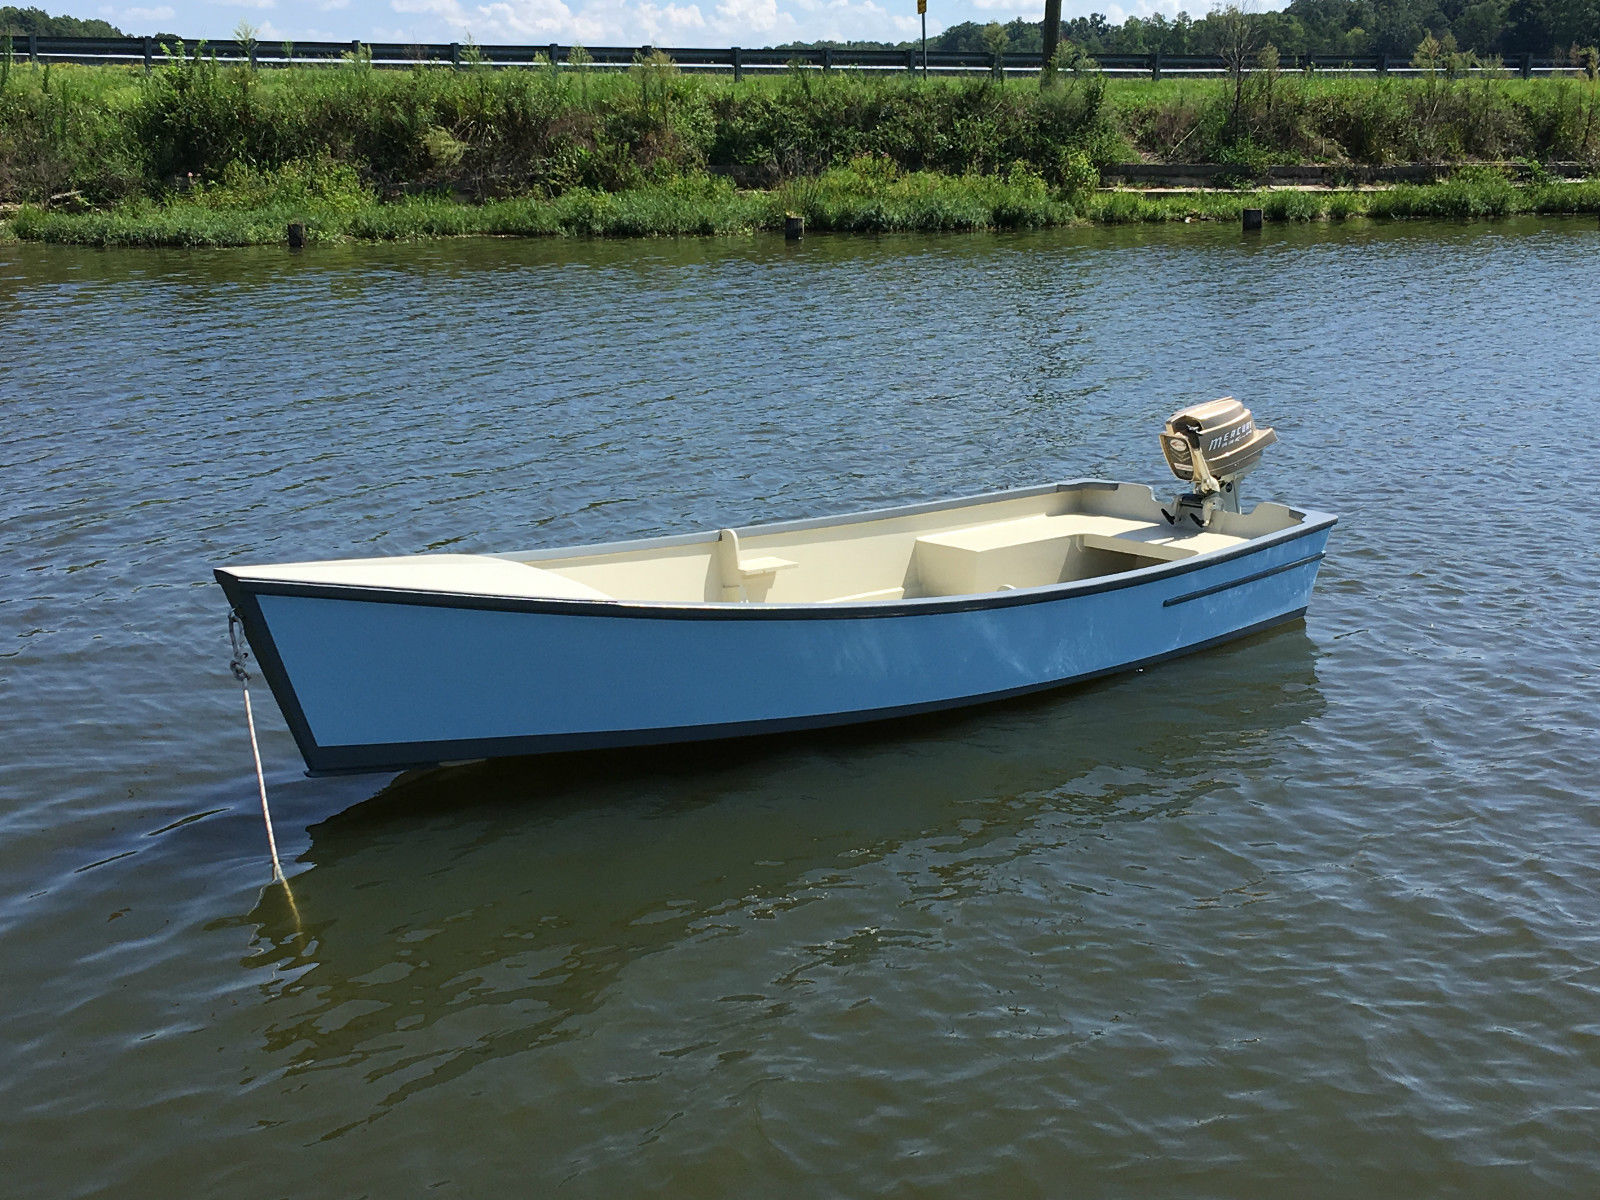 Harkers Island Skiff 1969 for sale for $2,000 - Boats-from 